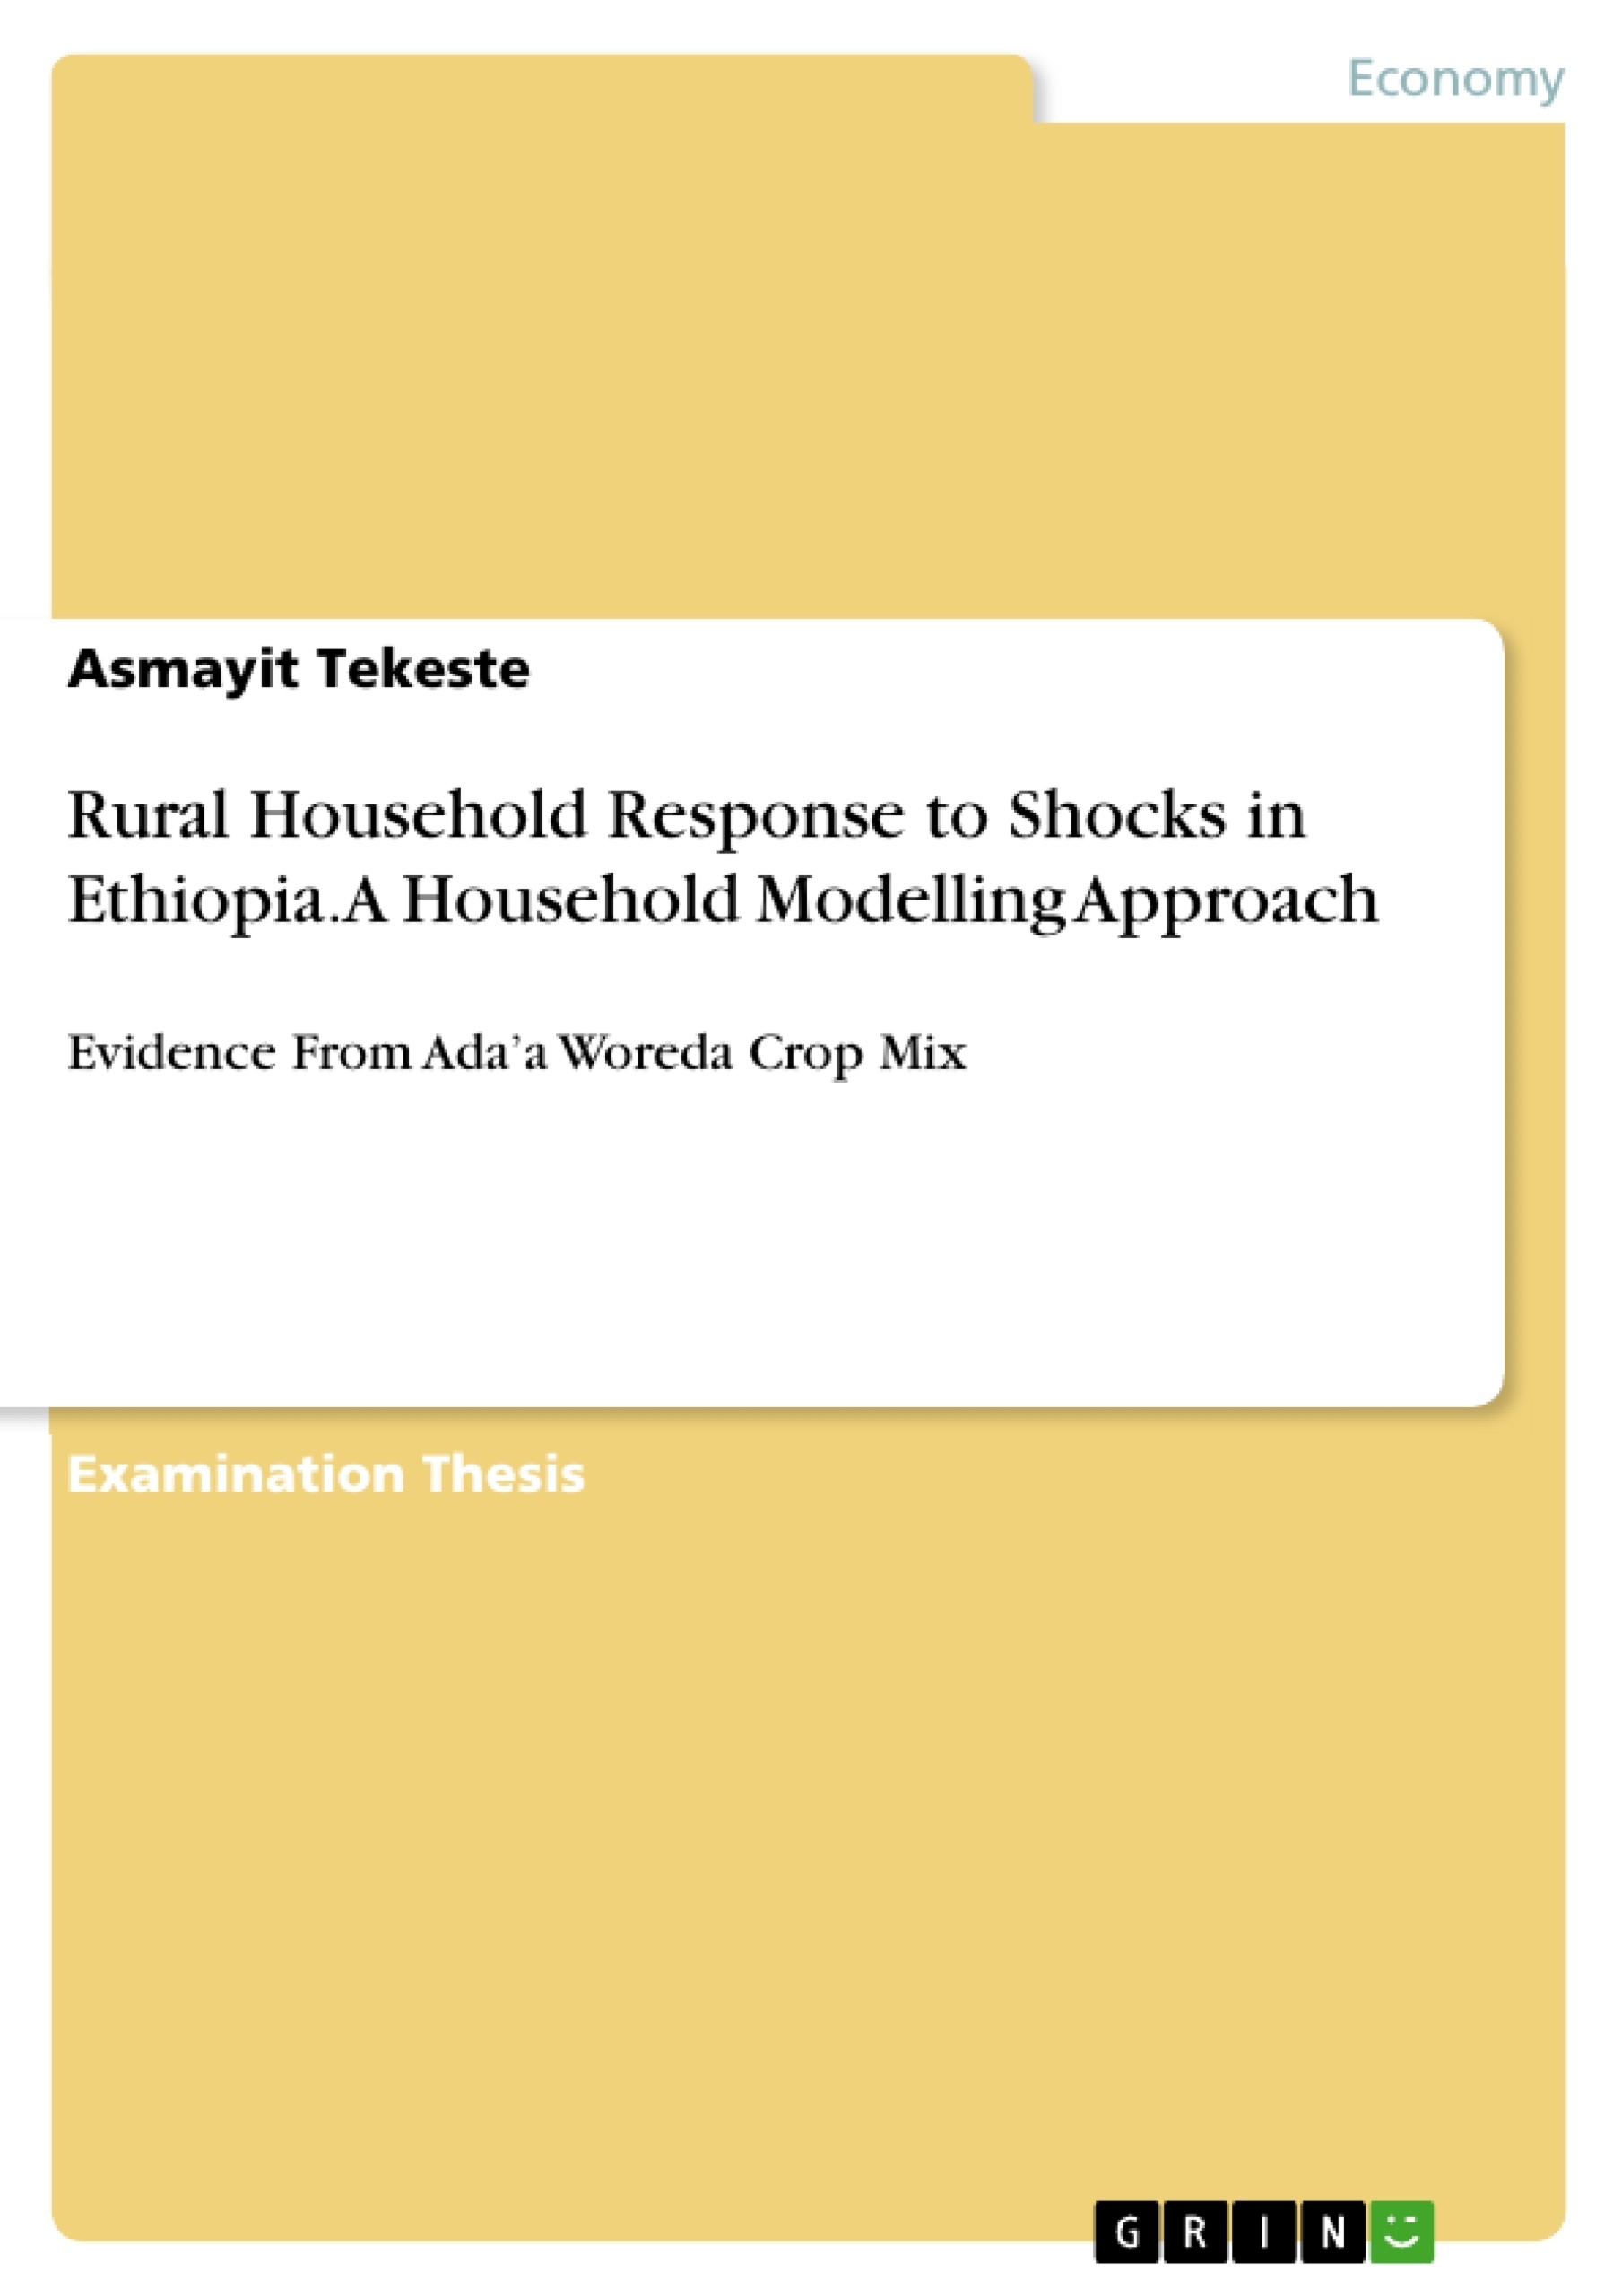 Título: Rural Household Response to Shocks in Ethiopia. A Household Modelling Approach